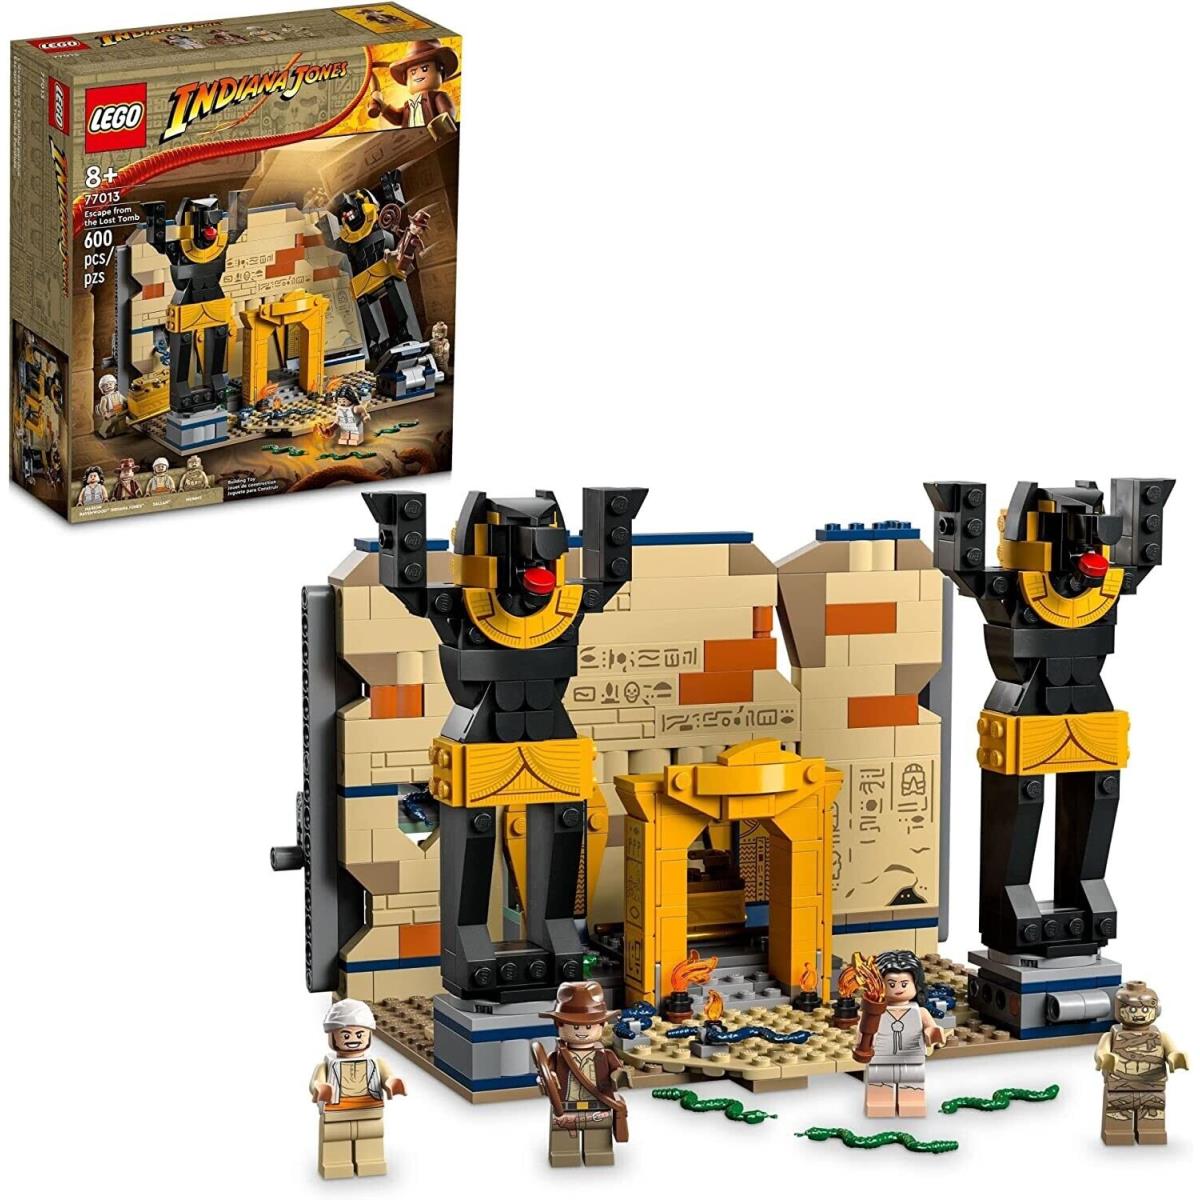 Lego Indiana Jones Escape From The Lost Tomb 77013 Building Toy Featuring a Mum